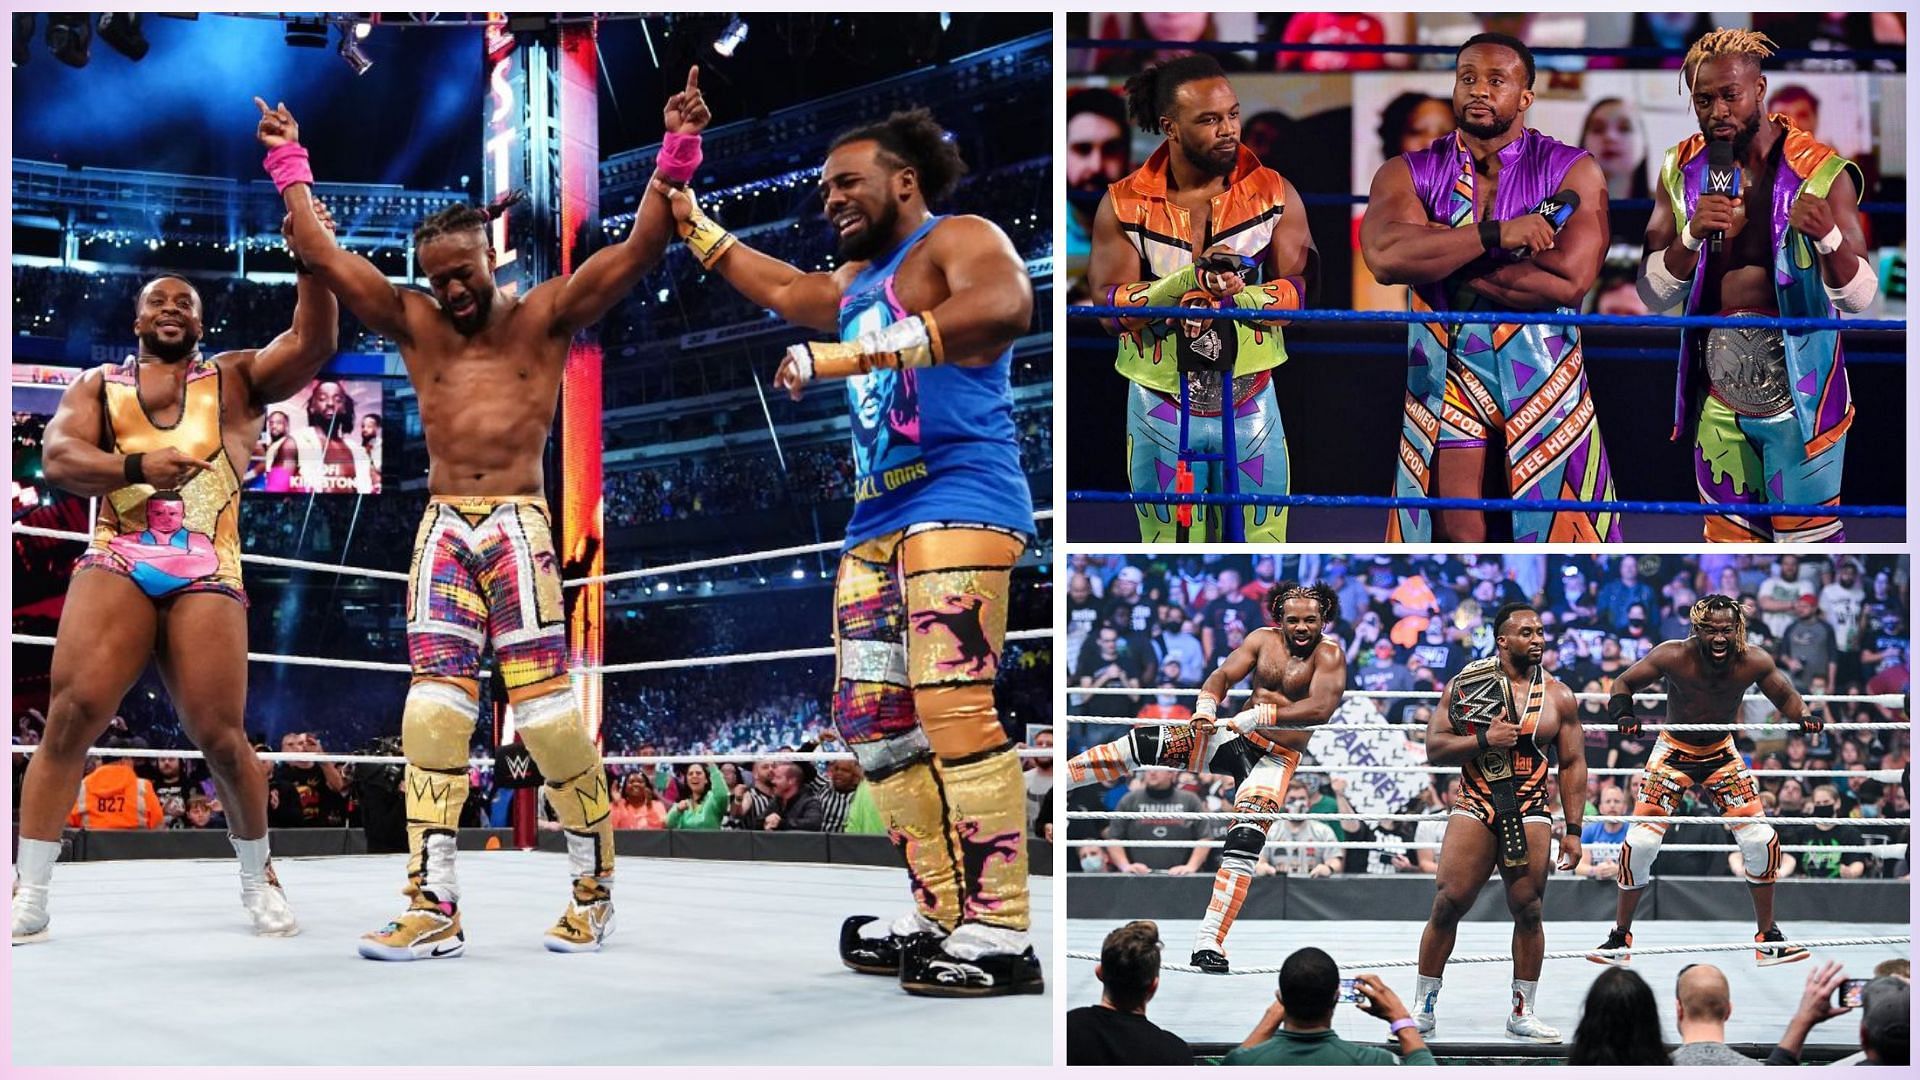 The New Day are 12-time tag team champions in WWE